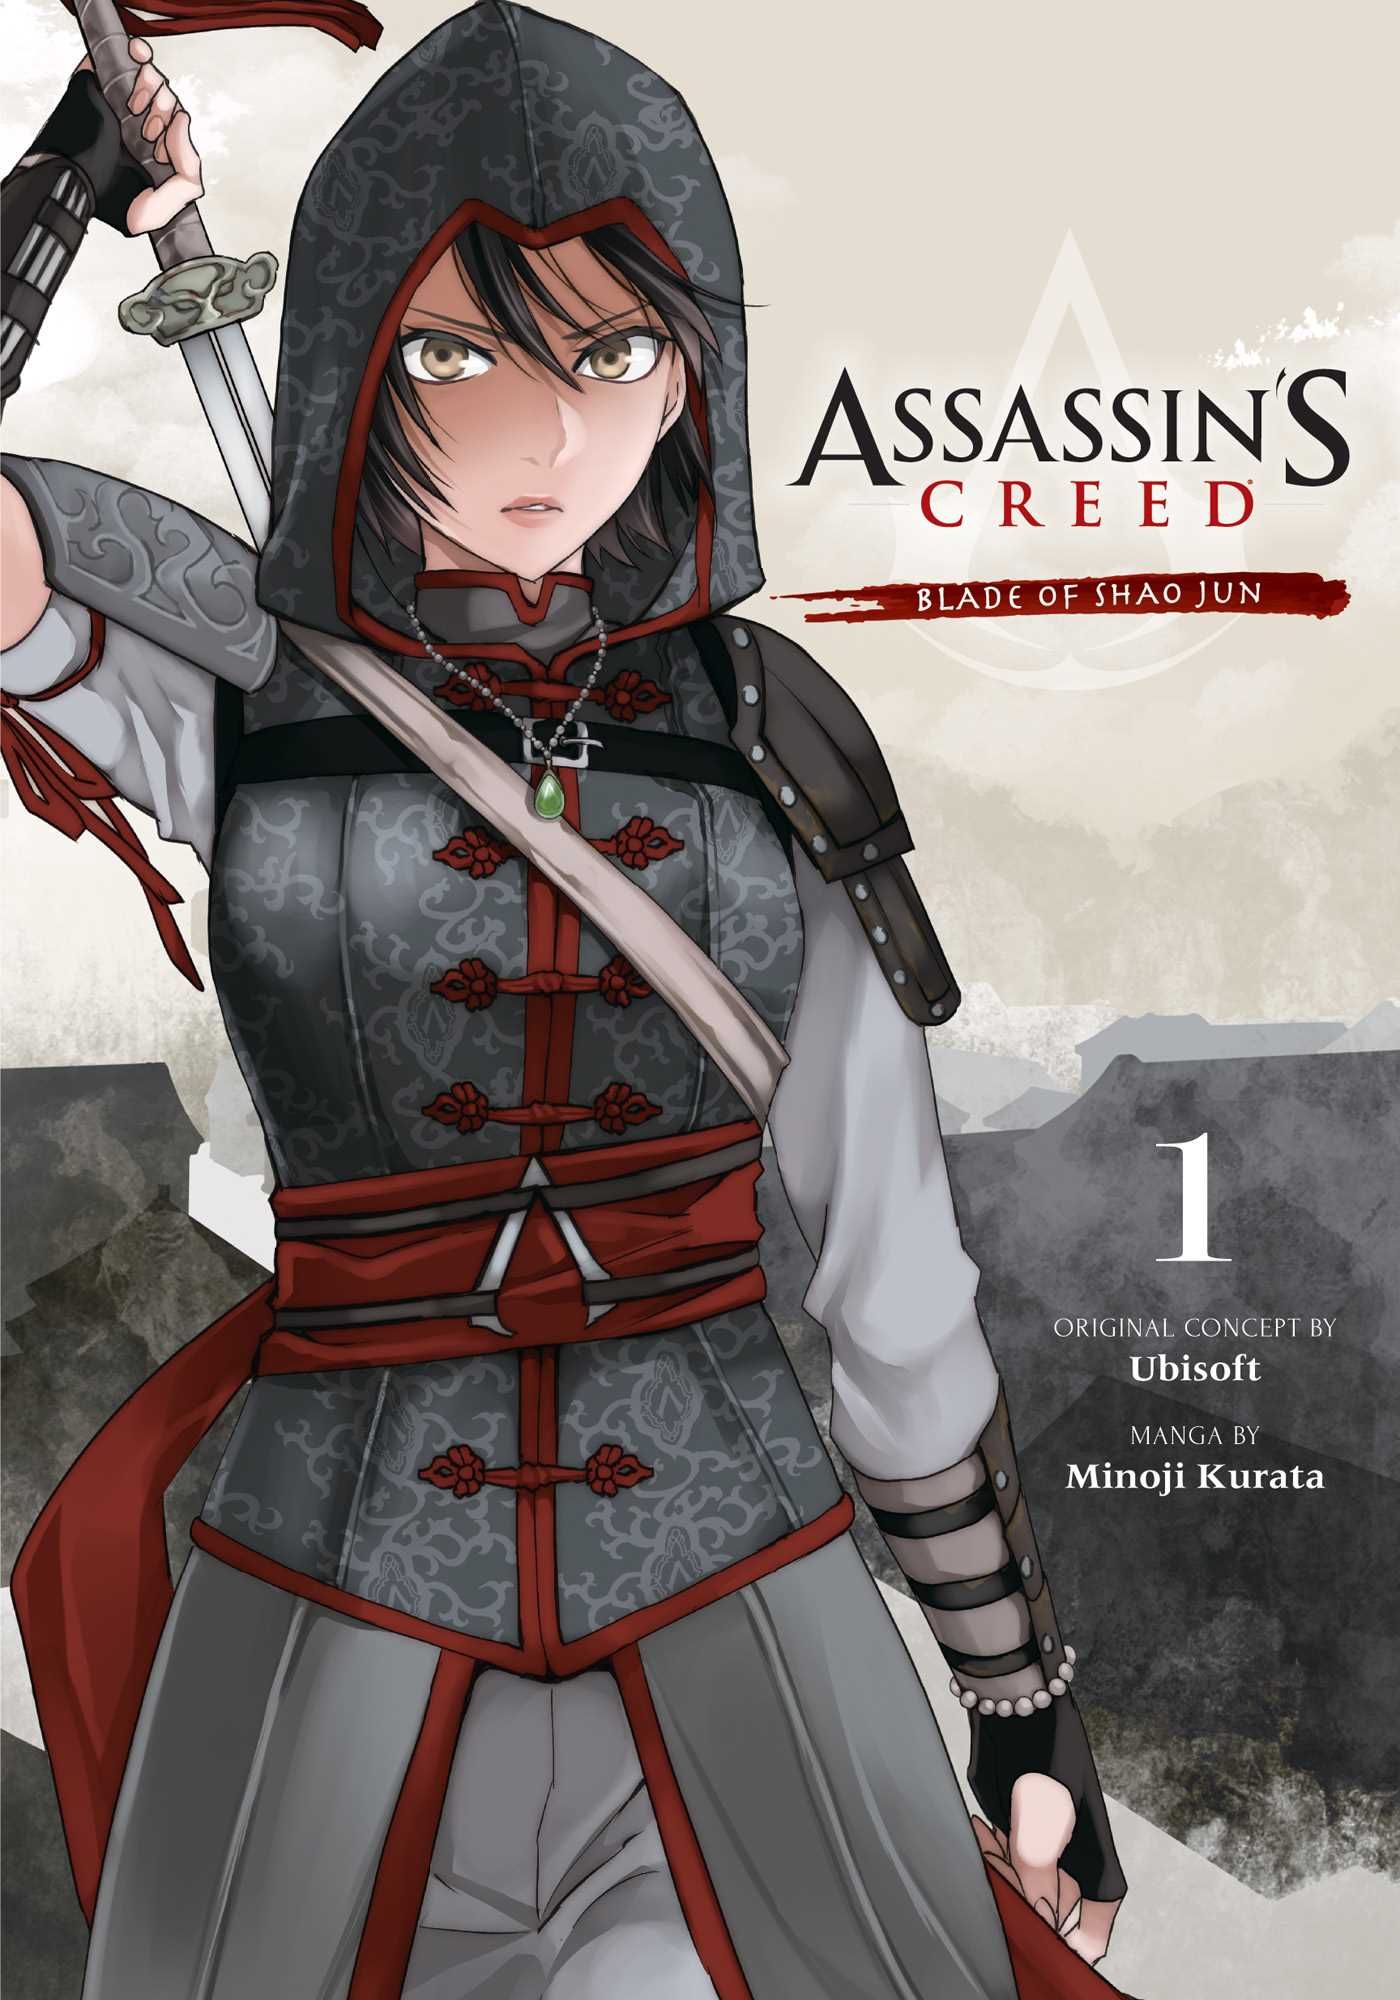 Assassin's Creed: Blade of Shao Jun, Vol. 1 Book Cover